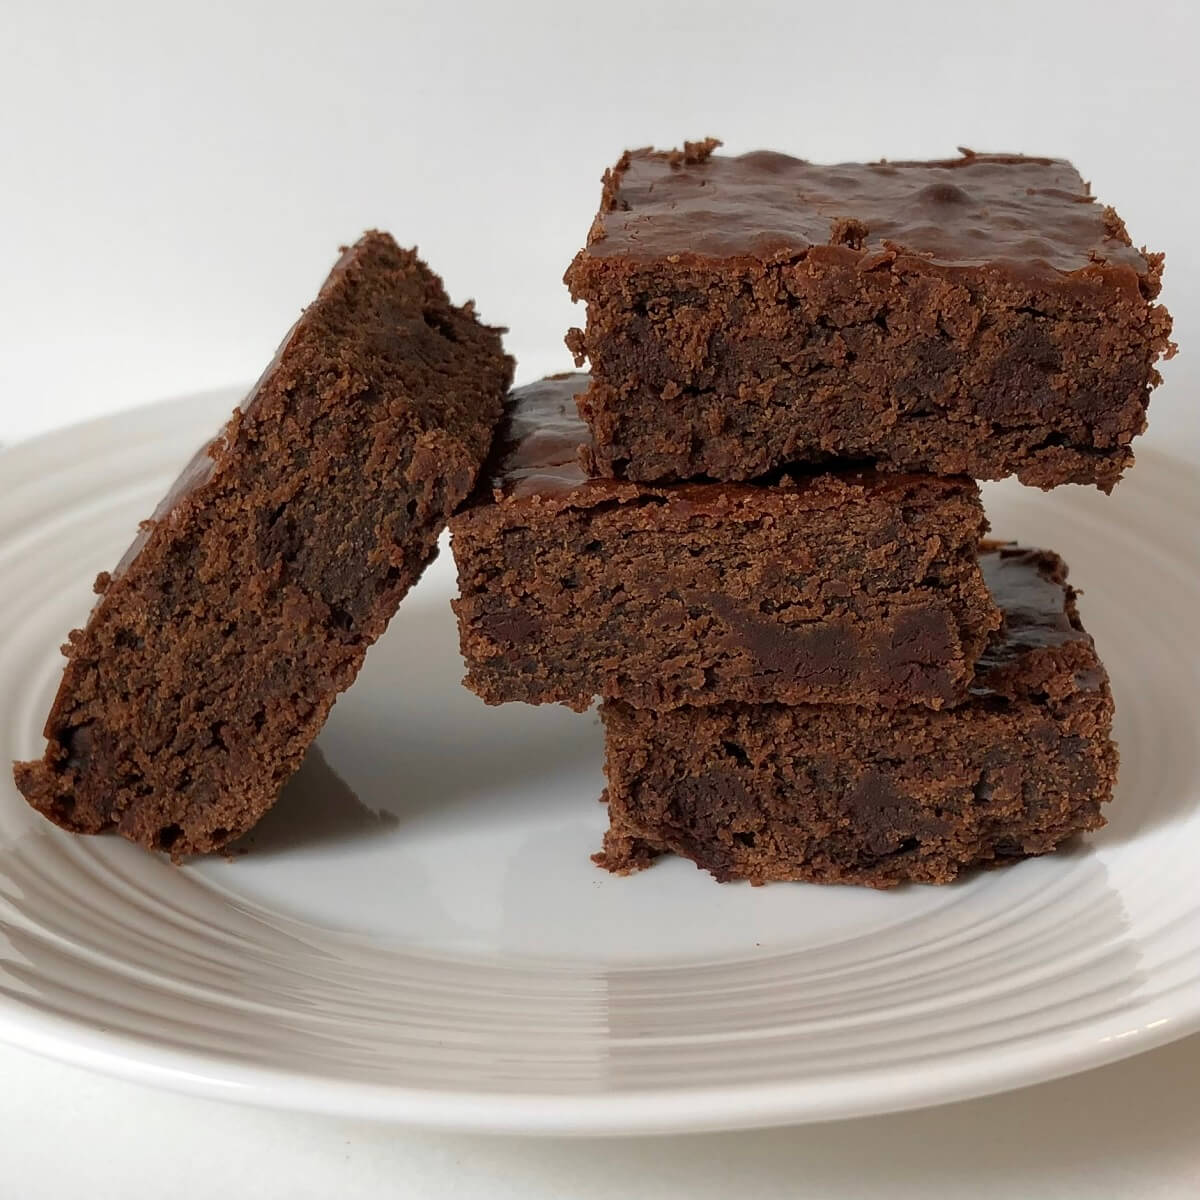 Chocolate brownies made with chickpea flour stacked on a white plate.